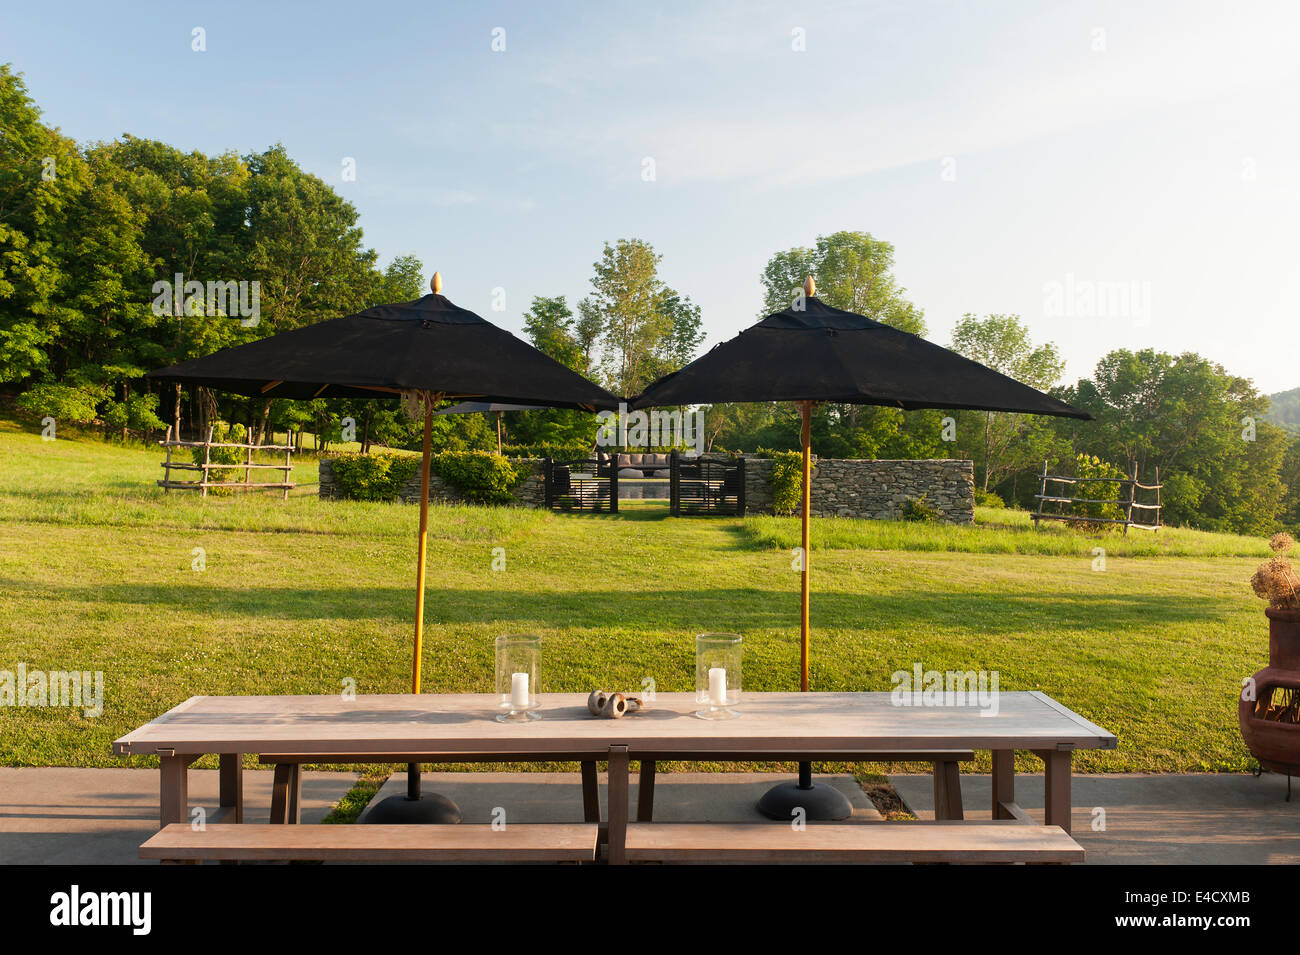 Black parasols on terrace with table and bench and garden views Stock Photo